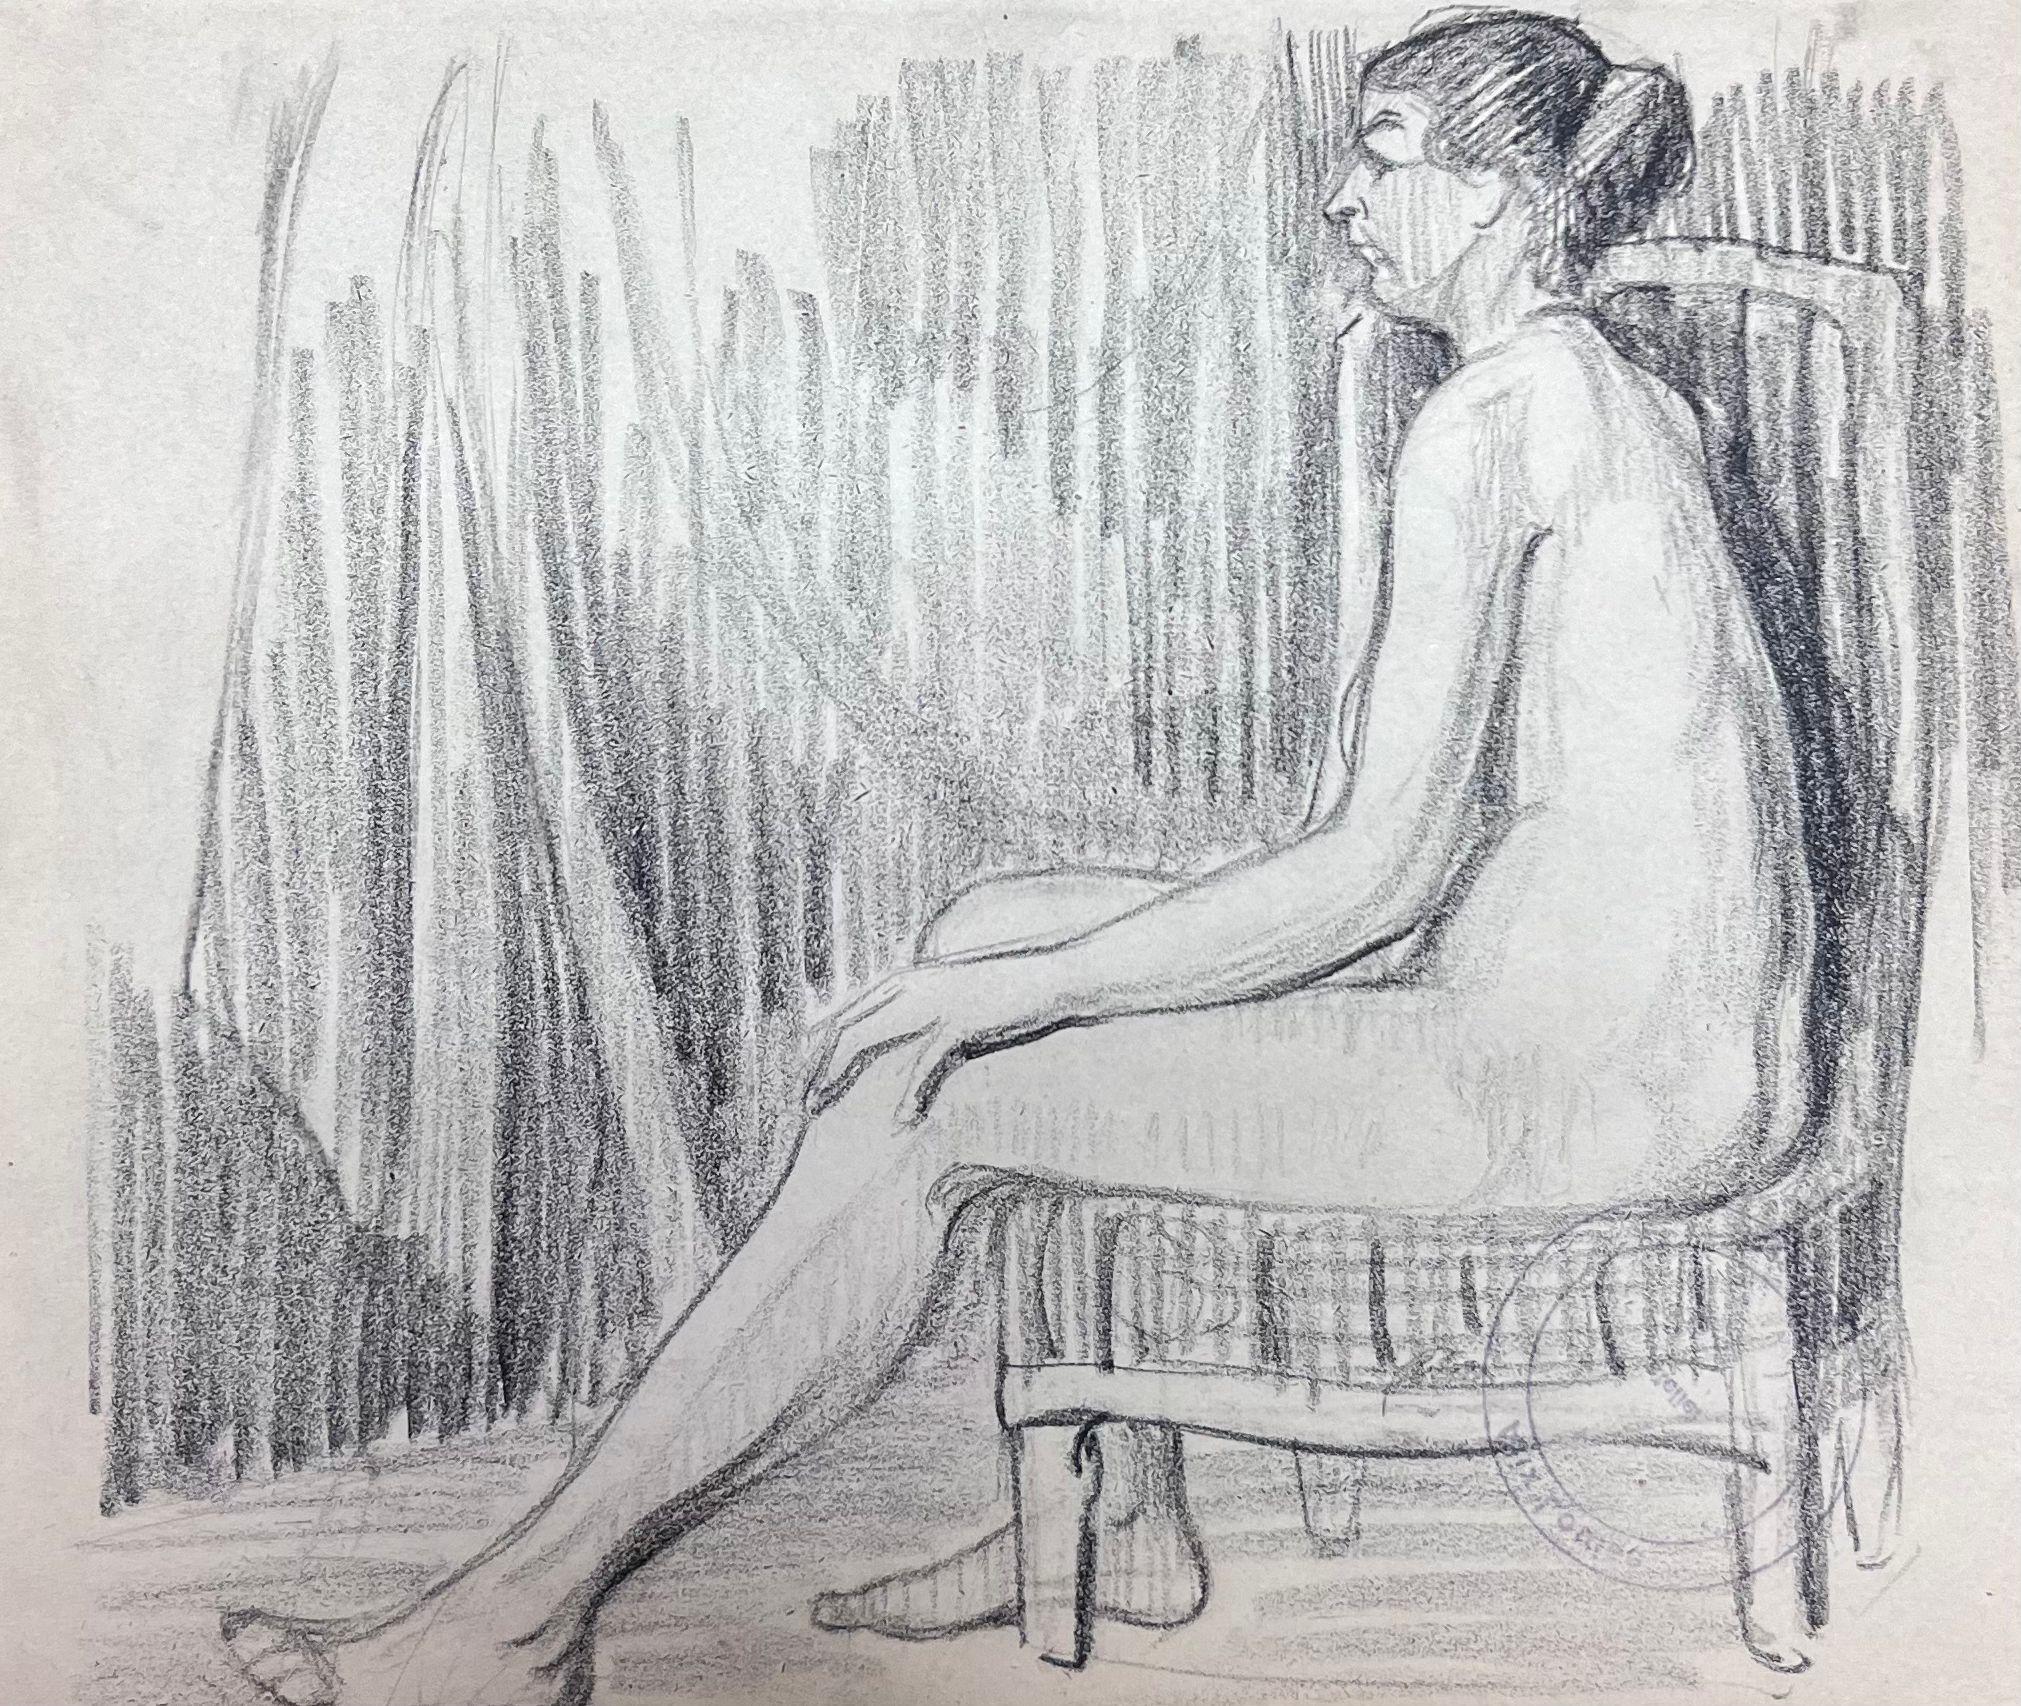 Nude Model
by Louise Alix (French, 1888-1980) *see notes below
provenance stamp to the back 
pencil drawing on artist paper, unframed
measures: 8 high by 10 inches wide
condition: overall very good and sound, a few scuffs and marks to the surface